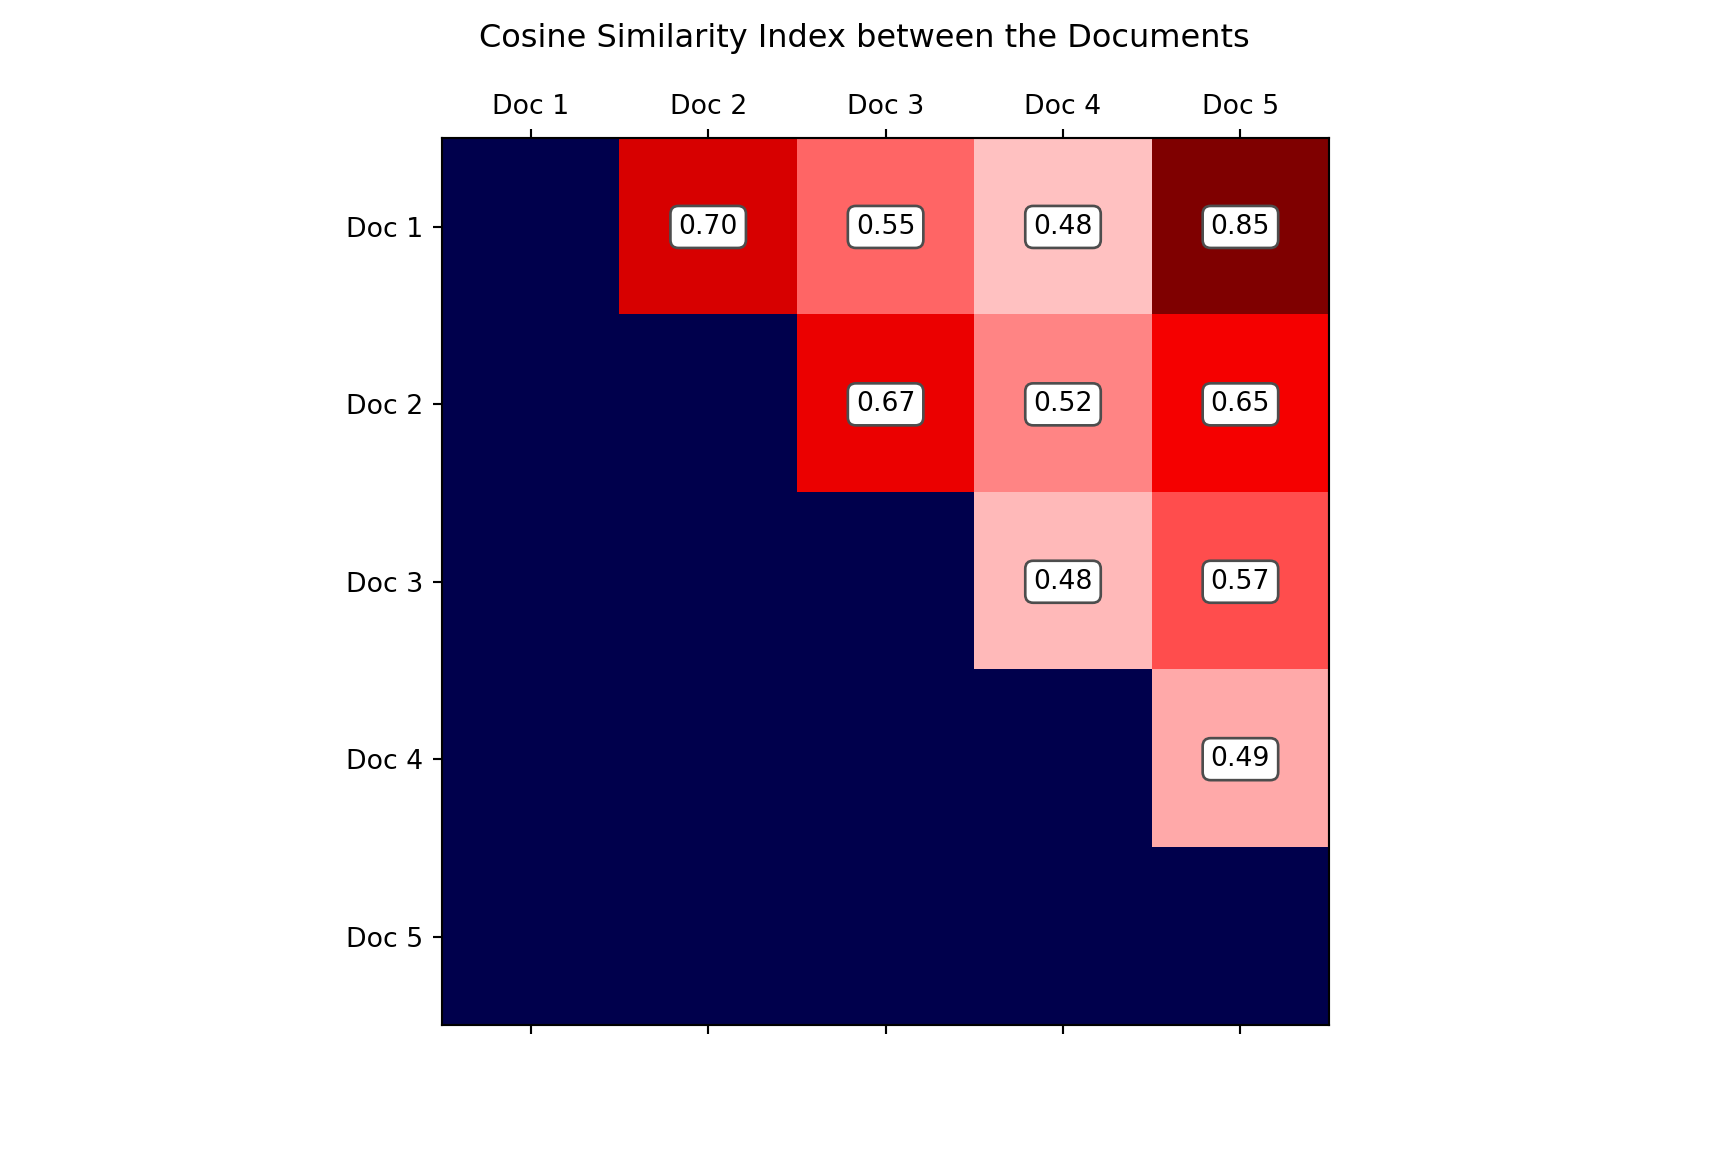 A heatmap of the cosine similarity indices across the five documents.